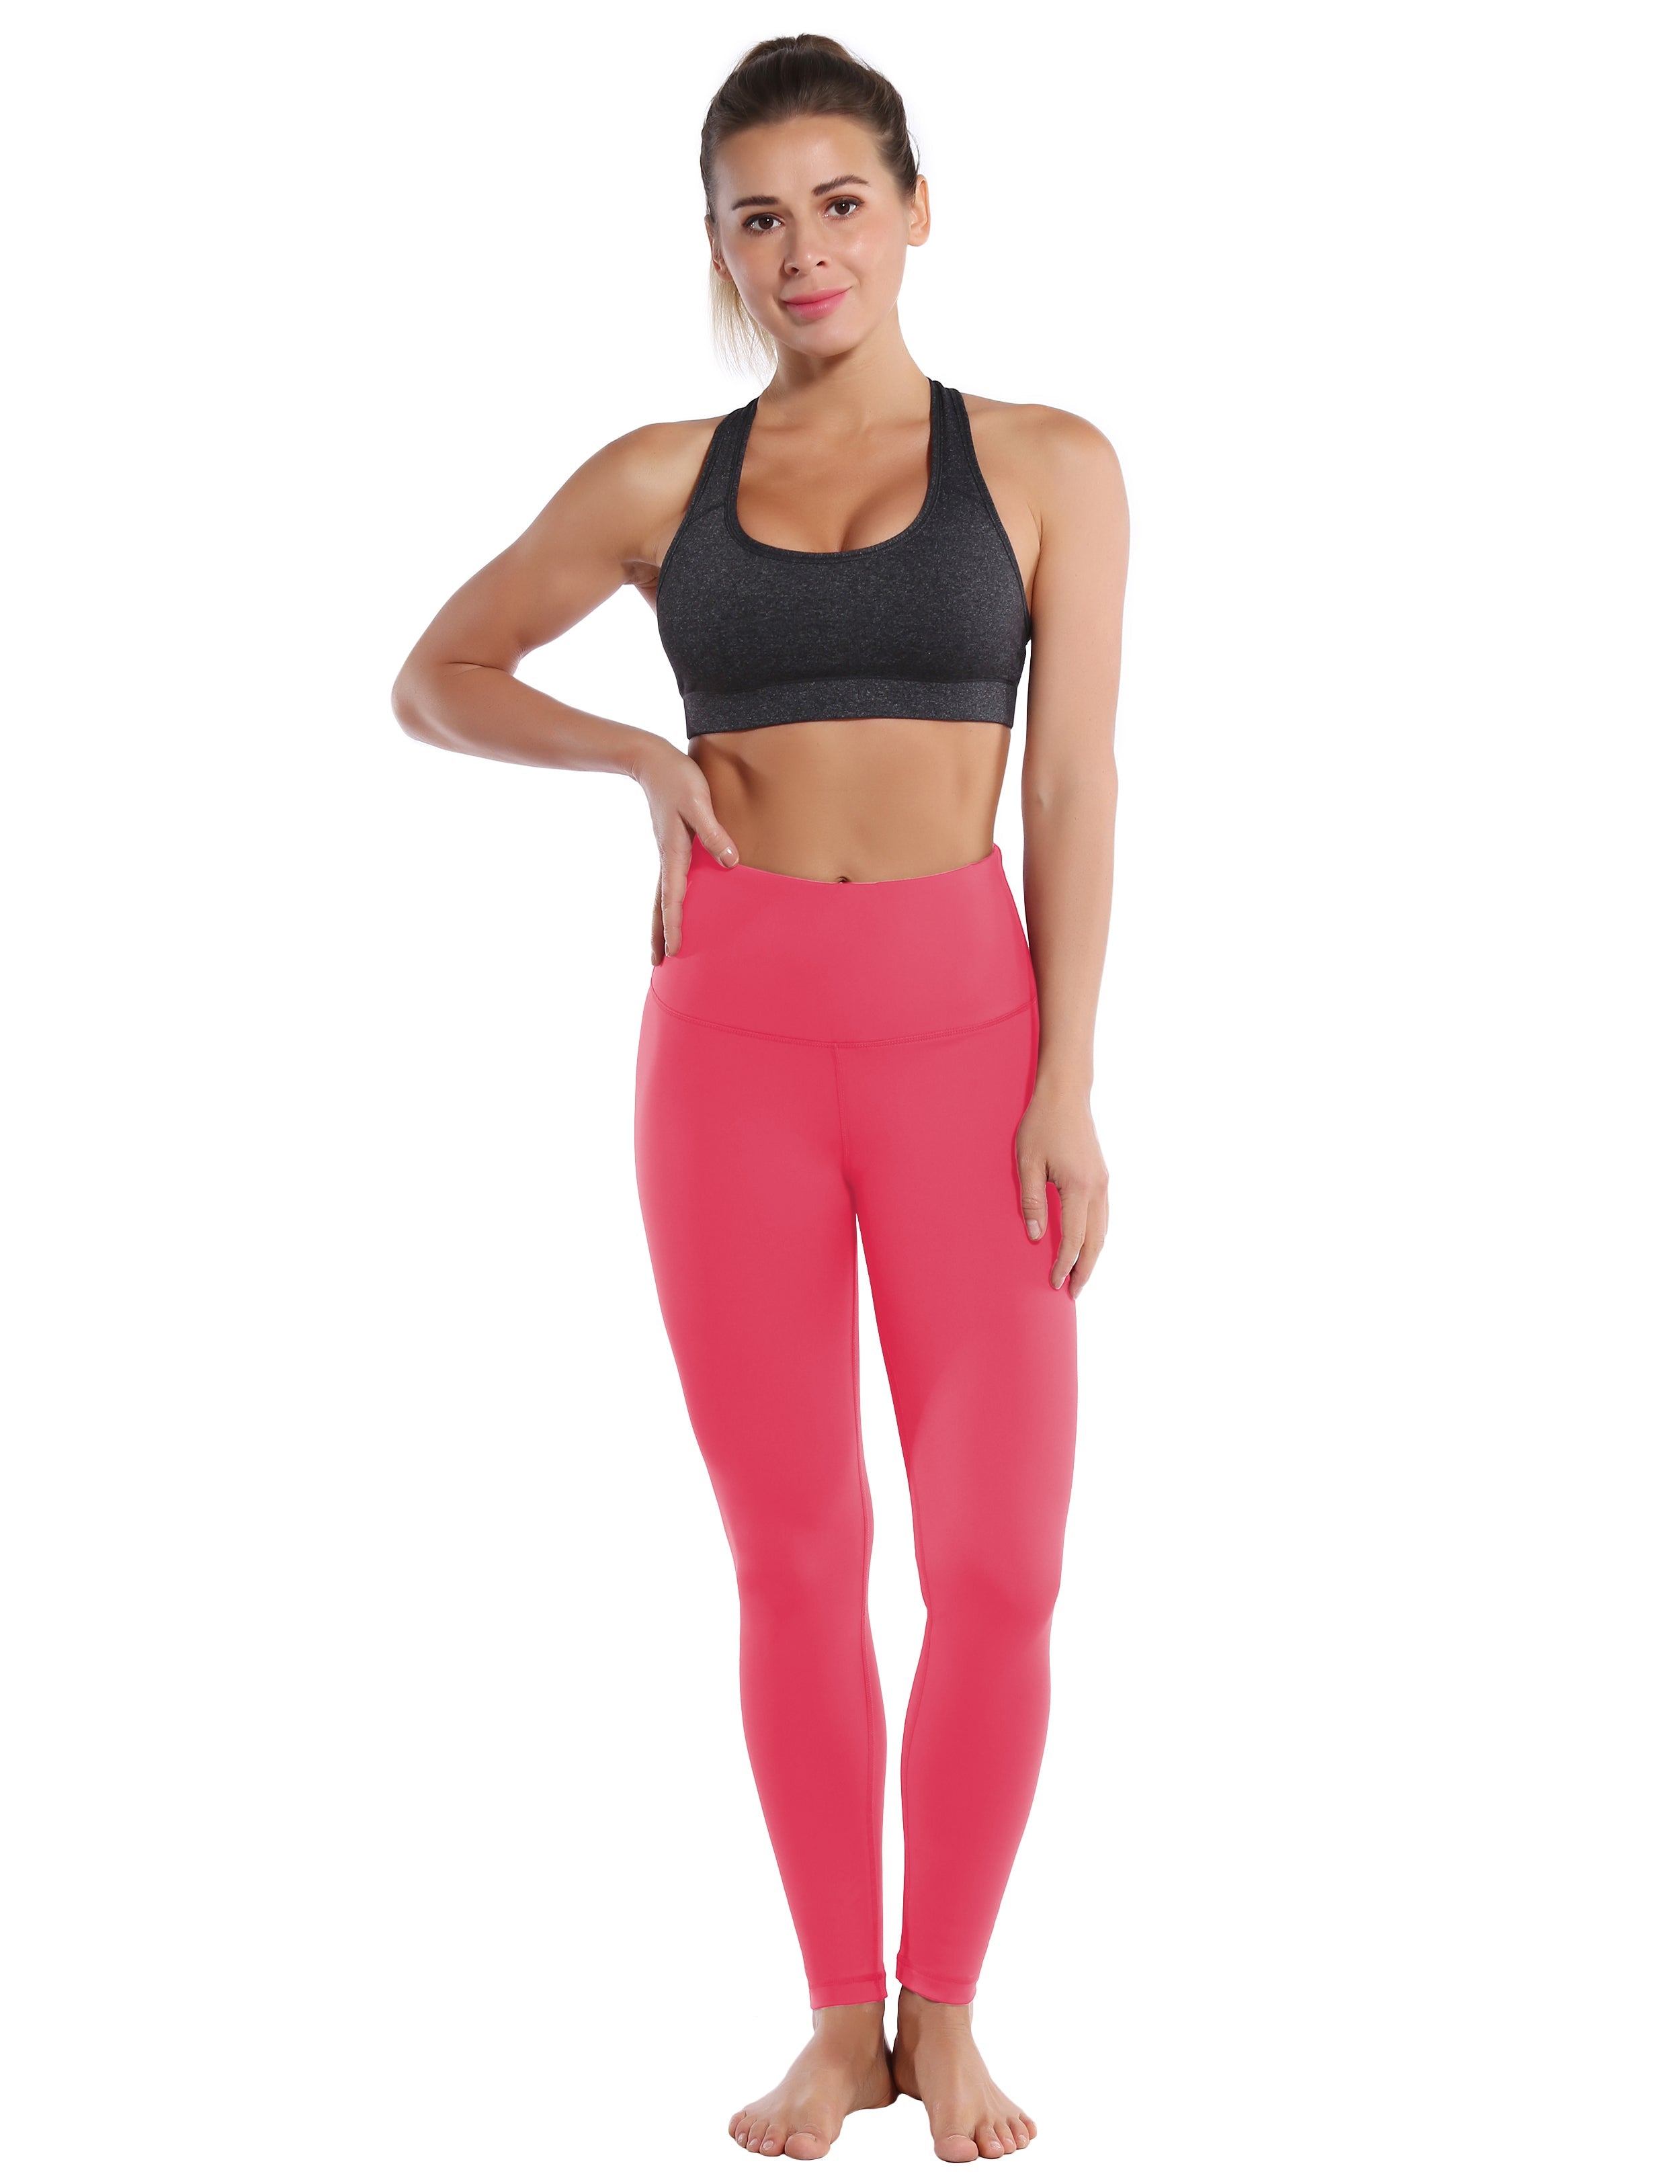 High Waist Gym Pants rosecoral 75%Nylon/25%Spandex Fabric doesn't attract lint easily 4-way stretch No see-through Moisture-wicking Tummy control Inner pocket Four lengths